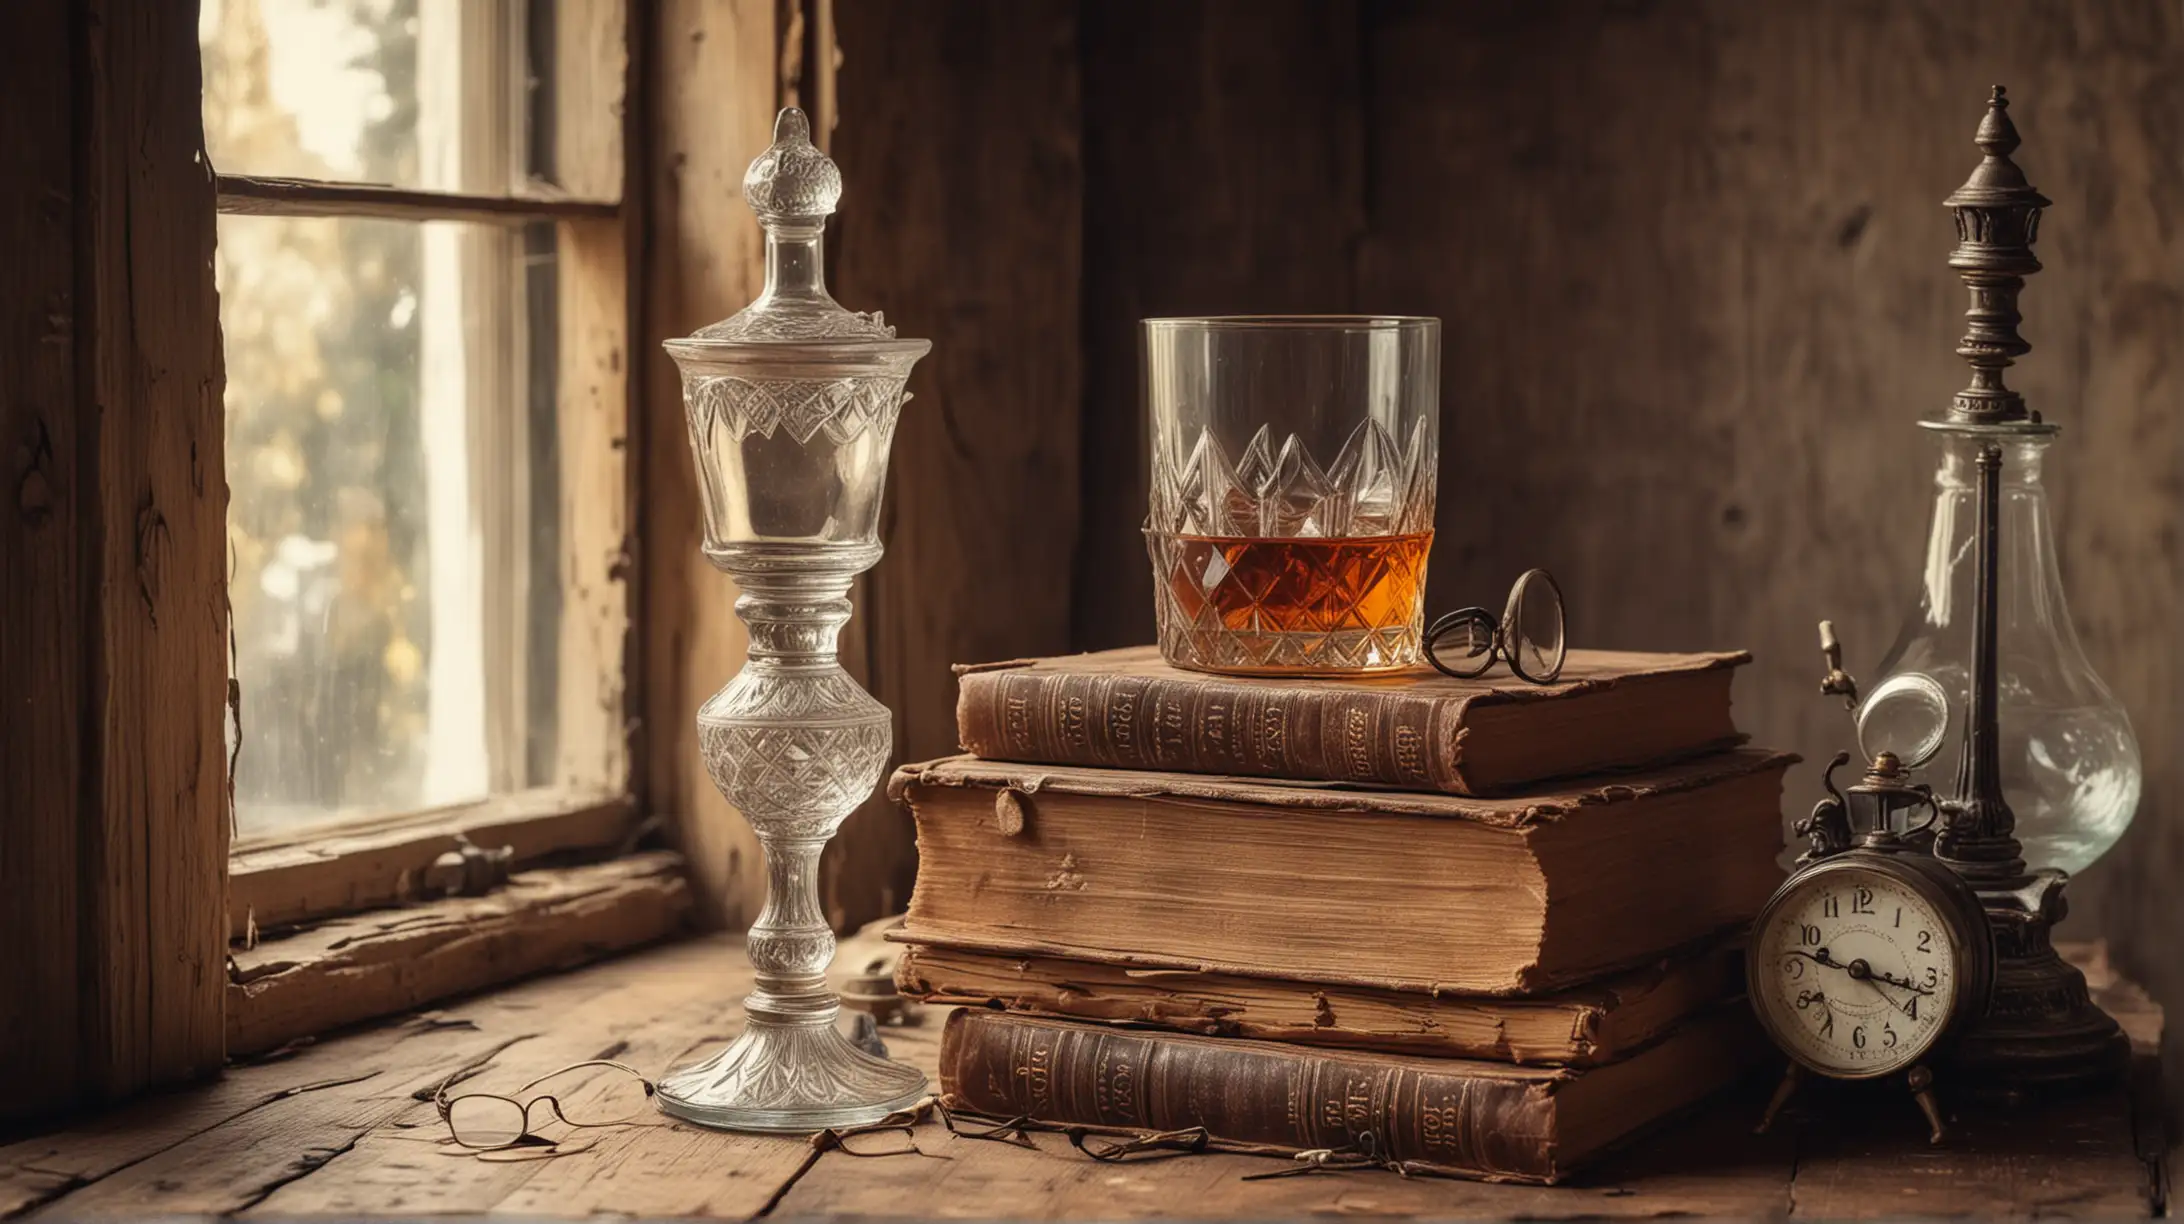 pile of antique books on old wooden table with small pair of antique glasses with brandy glass and old clock near a window of an 1800's setting